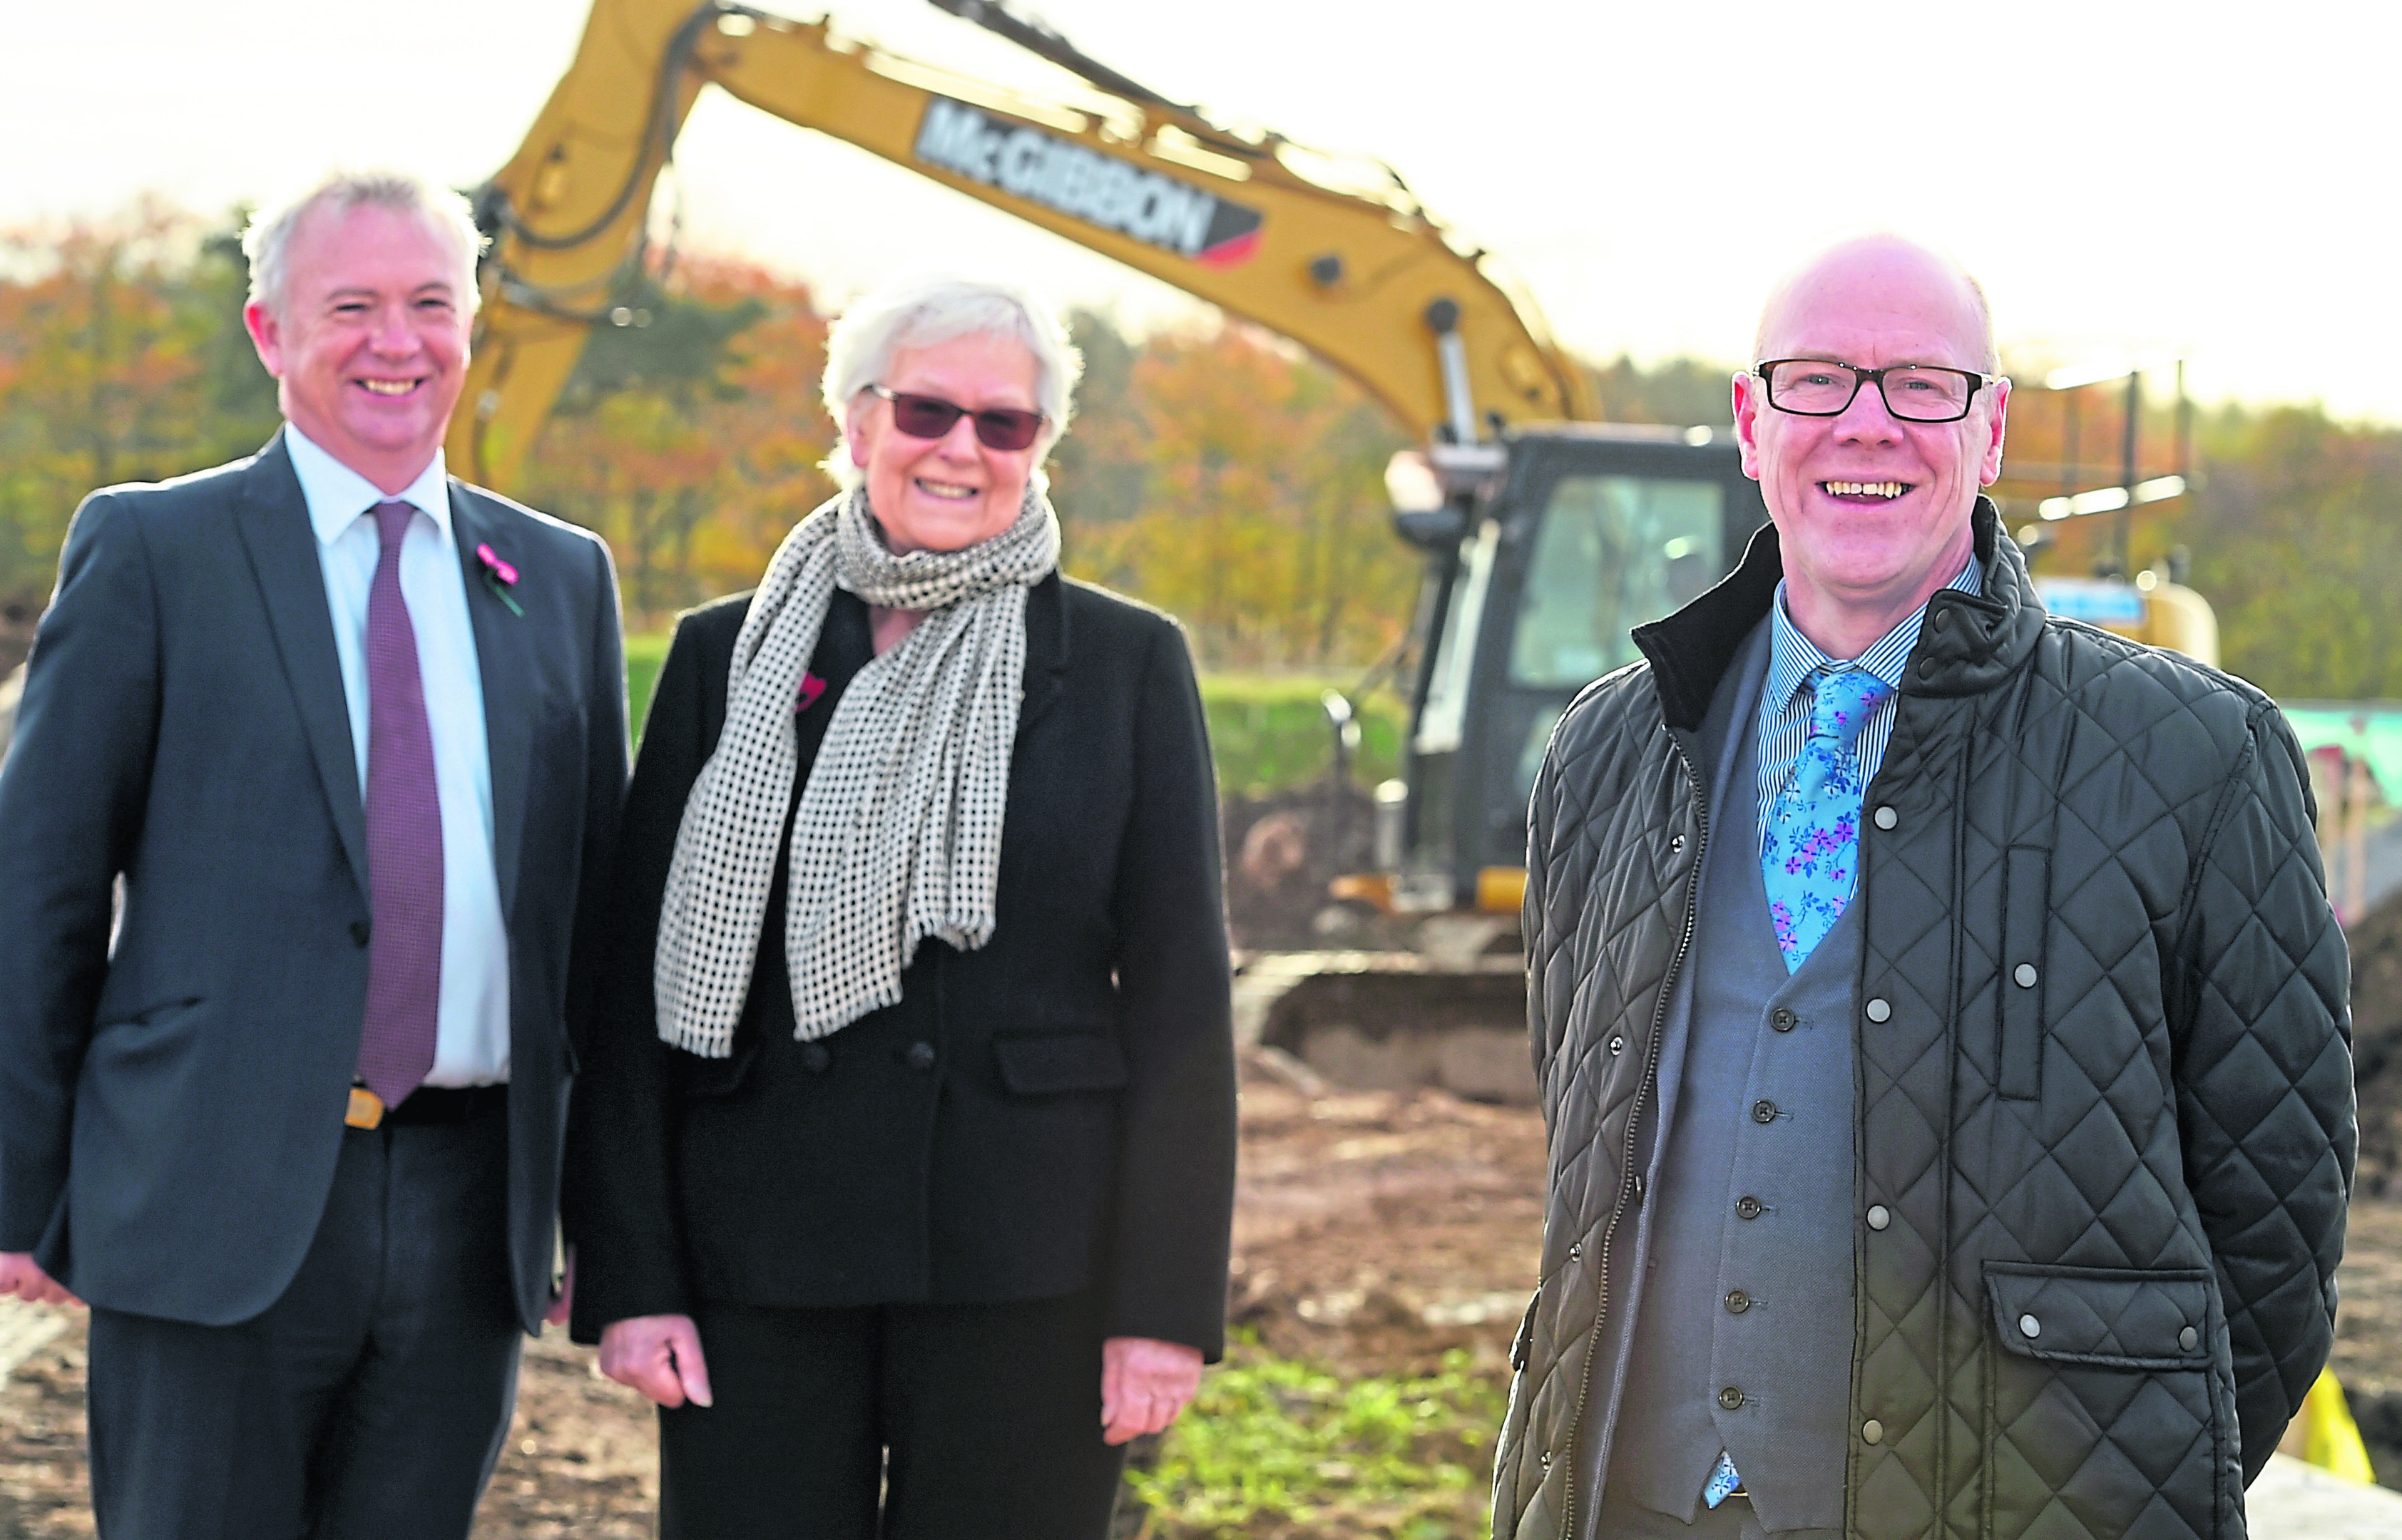 The site of Stewart Milne, new Hillcrest housing at Countesswells, Aberdeen. In the picture are from left: Glenn Allison, CEO Stewart Milne and Hillcrest, Val Howard, chair of Hillcrest and Kevin Stewart, housing minister.